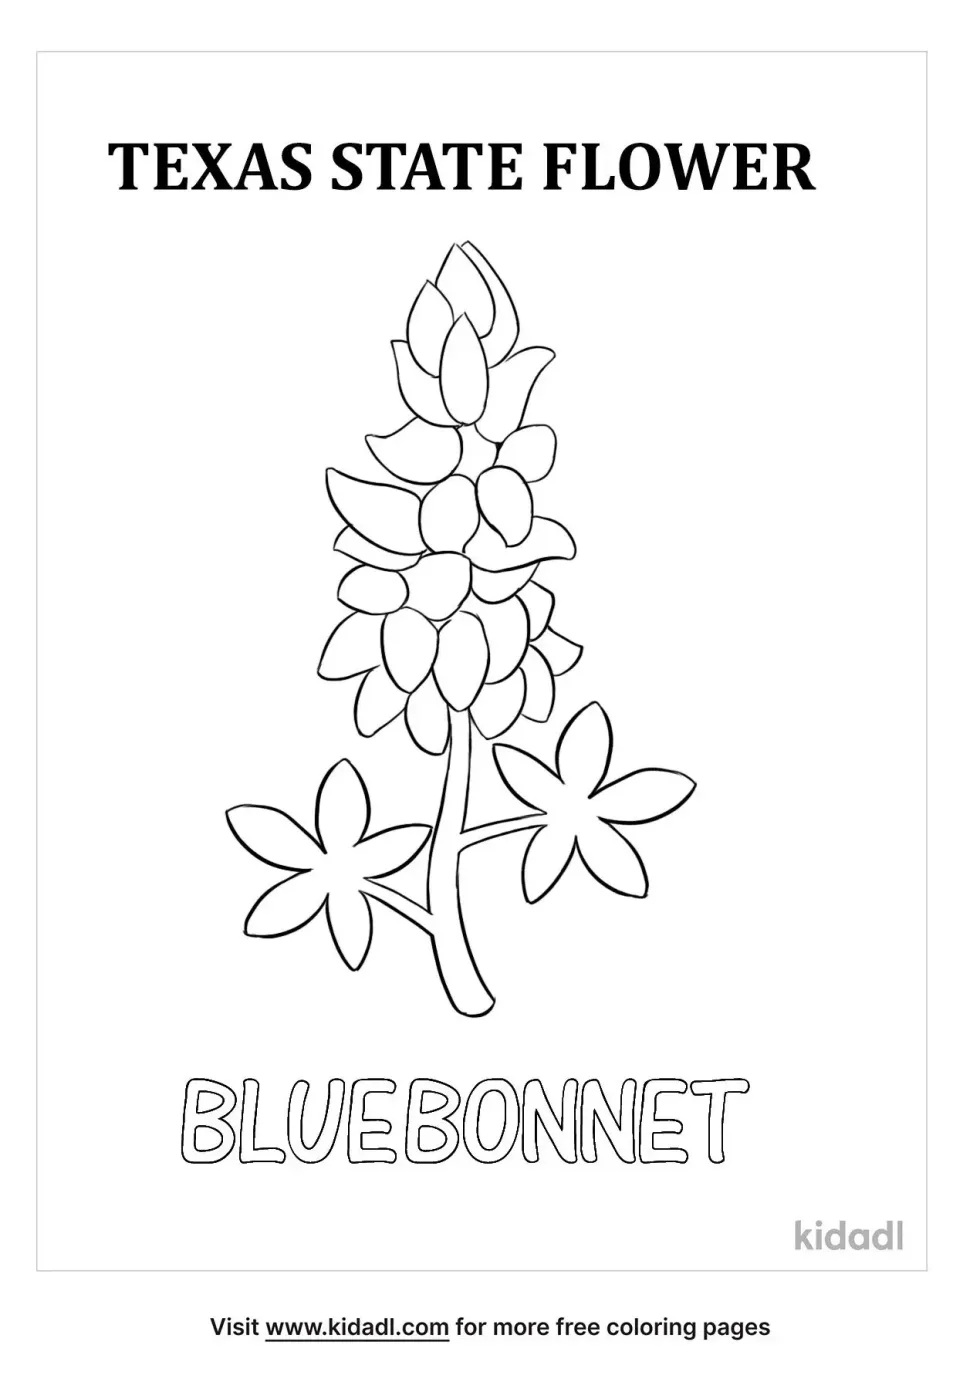 Texas State Flower Coloring Page